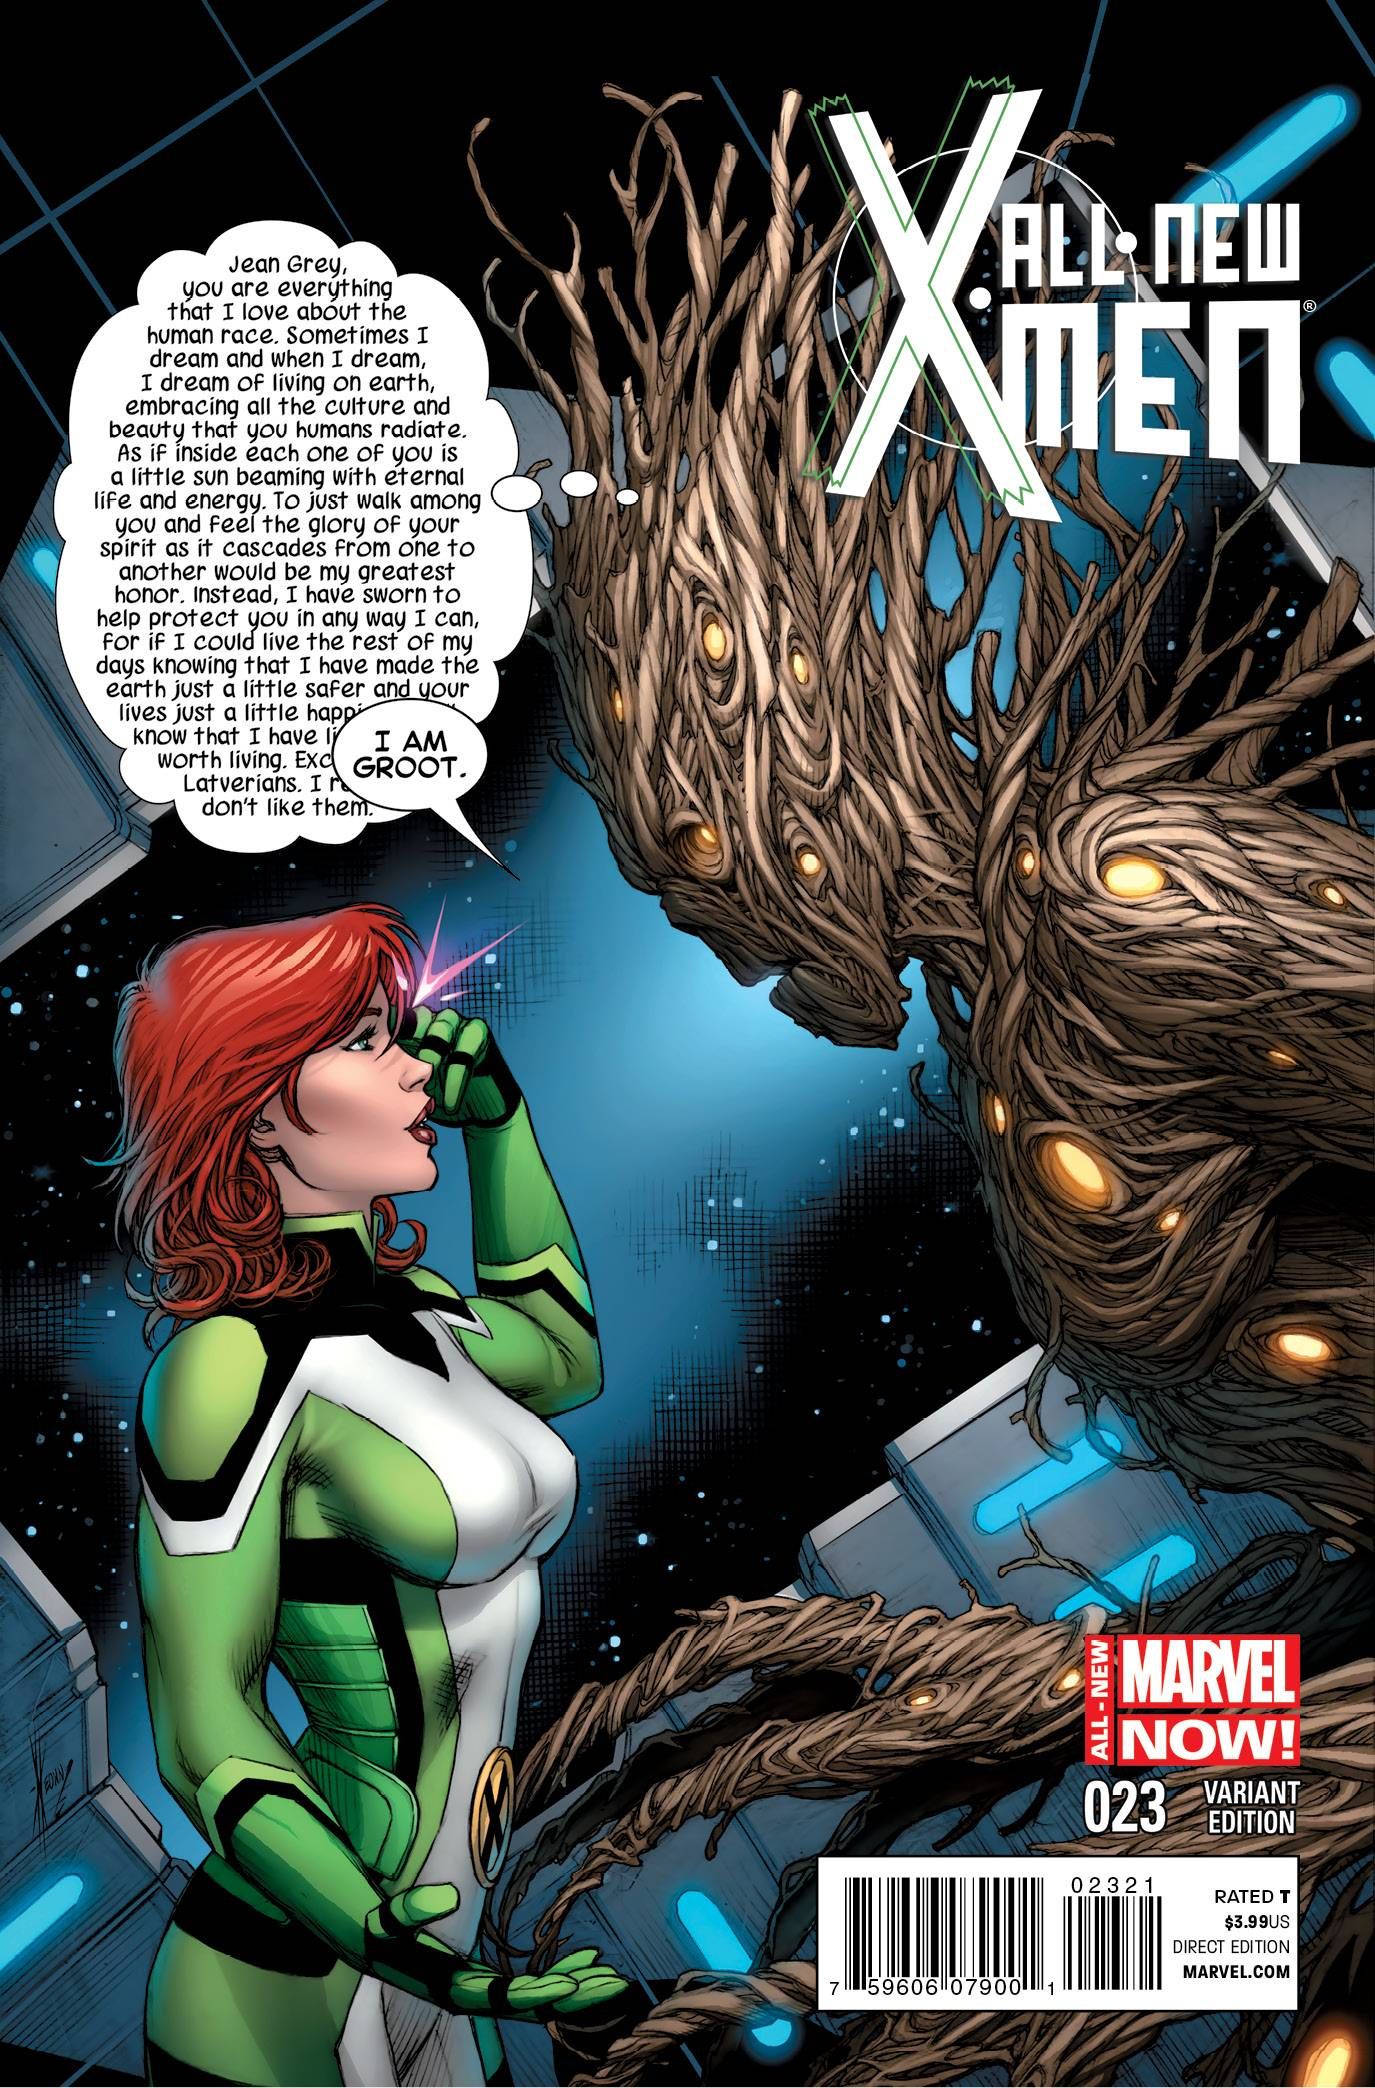 Jean Grey interprets Groot's iconic phrase with telepathy while standing in front of one another